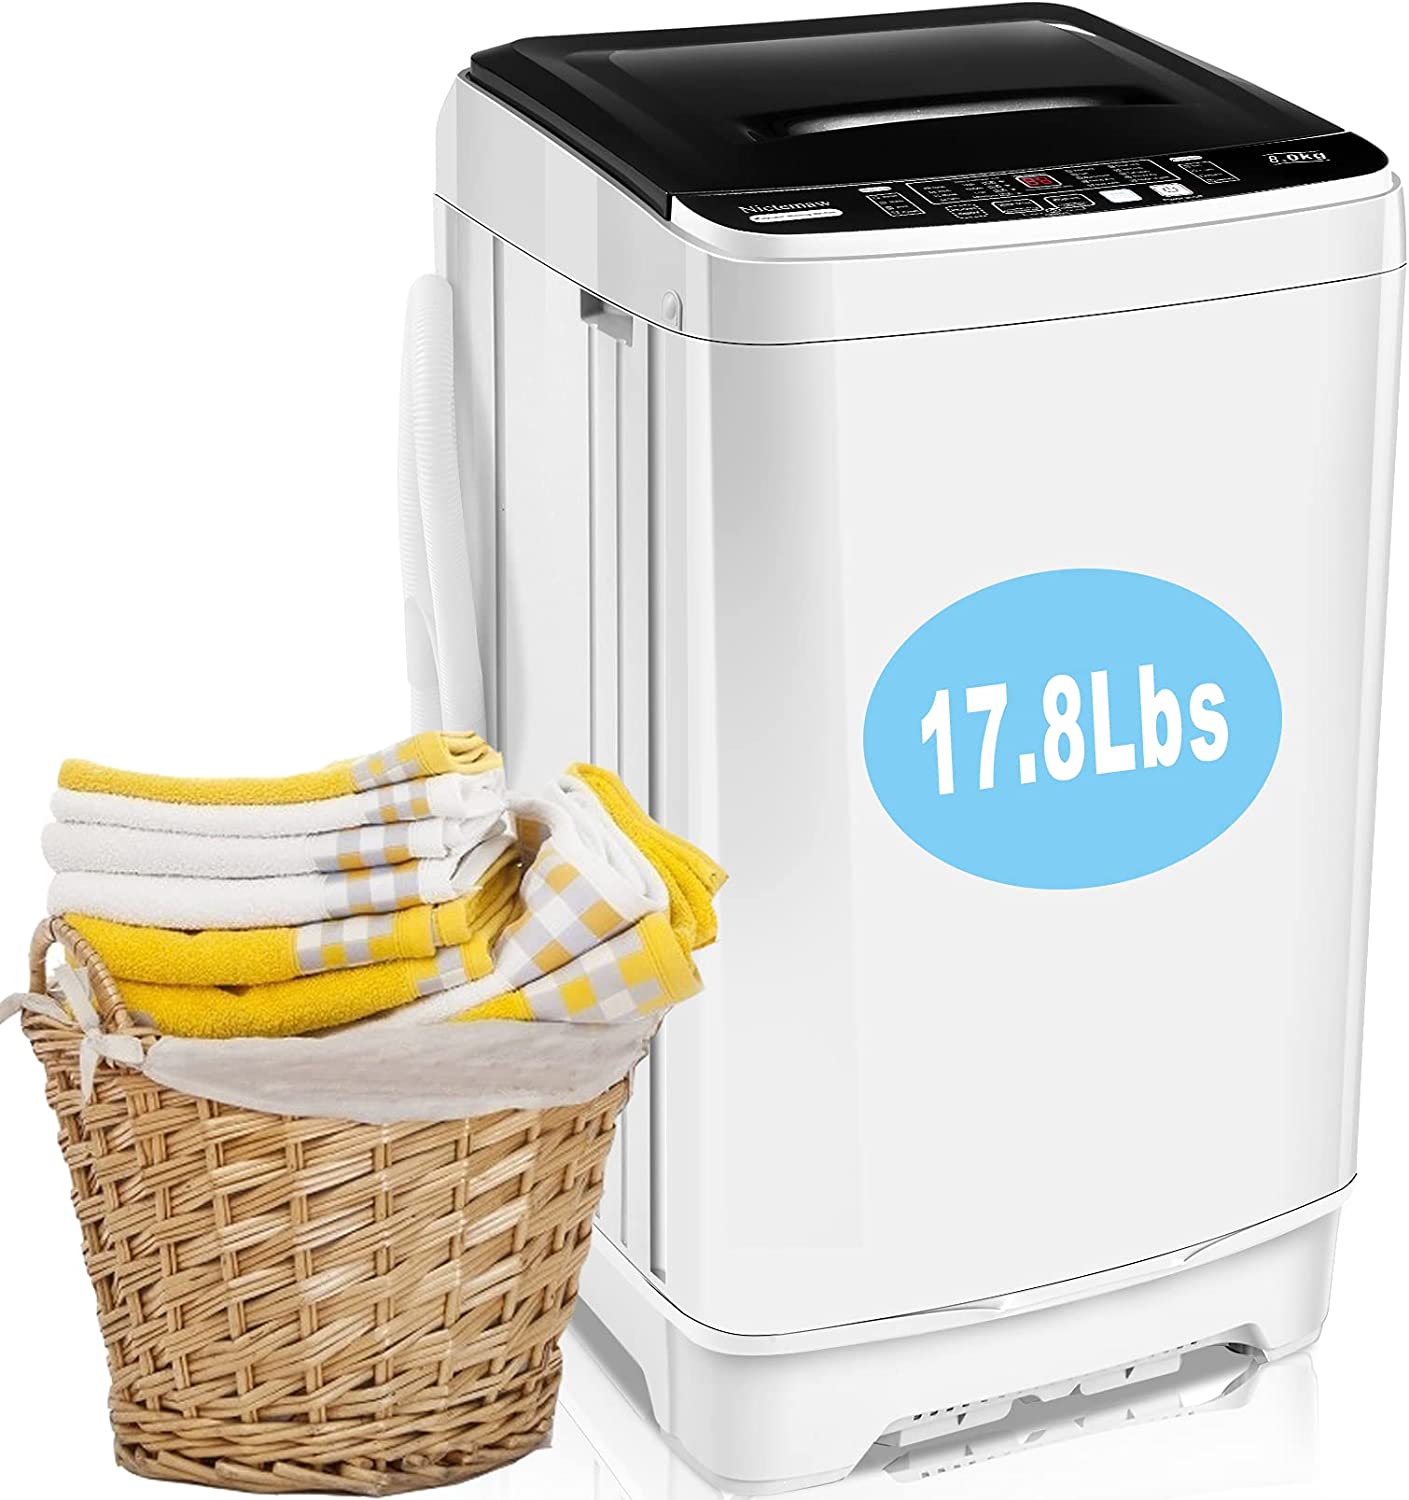 Nictemaw 2-in-1 Compact Laundry Washer with Drain Pump